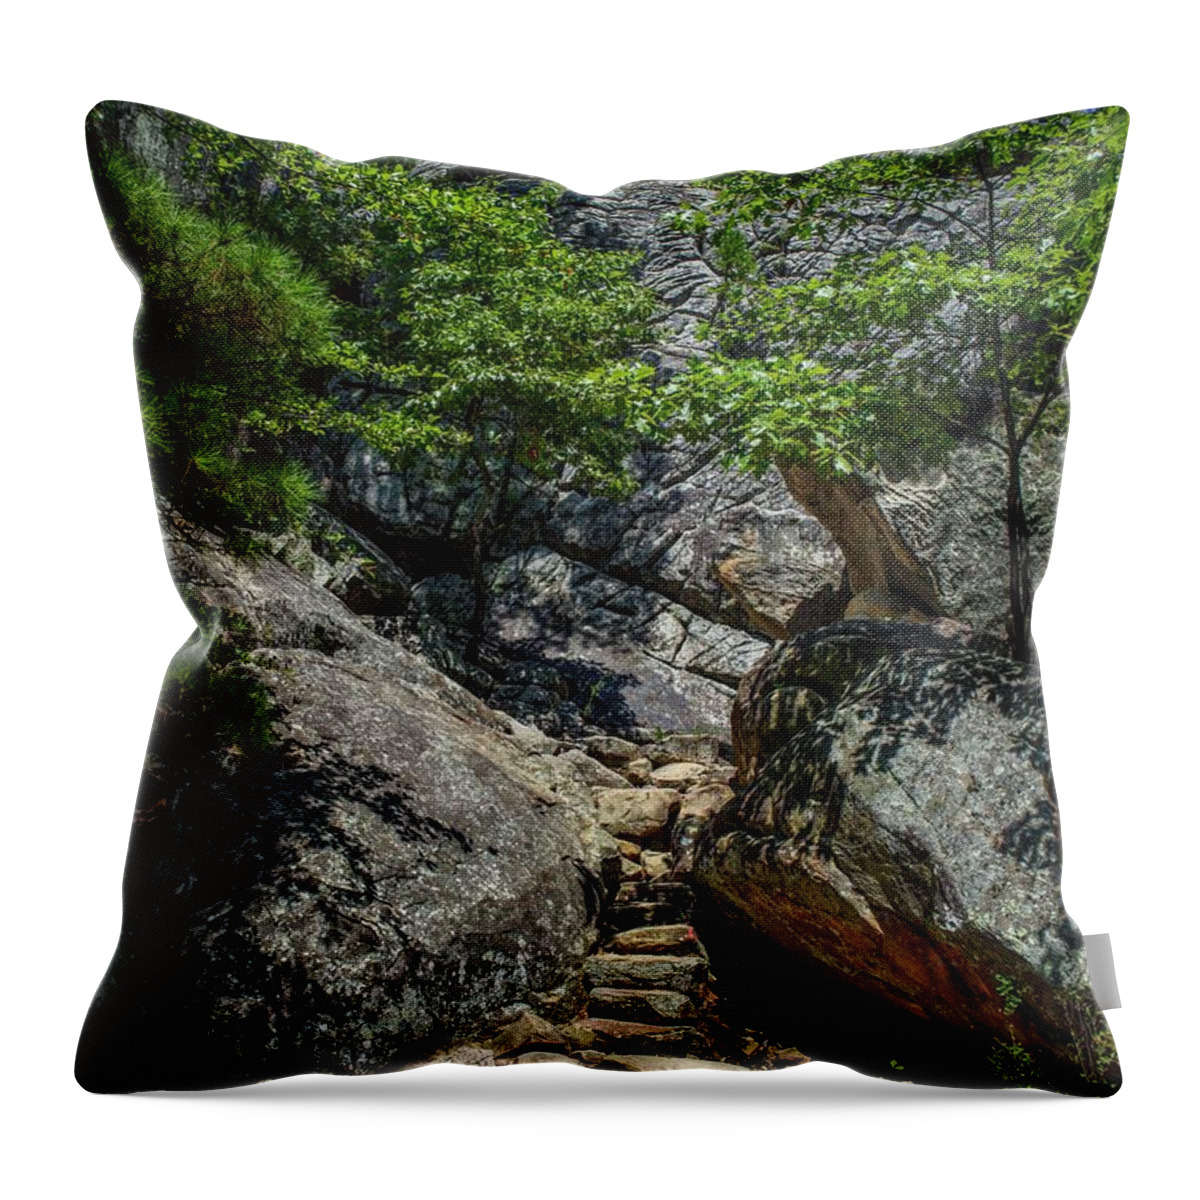 Steps Throw Pillow featuring the photograph Robbers Cave Steps by Buck Buchanan